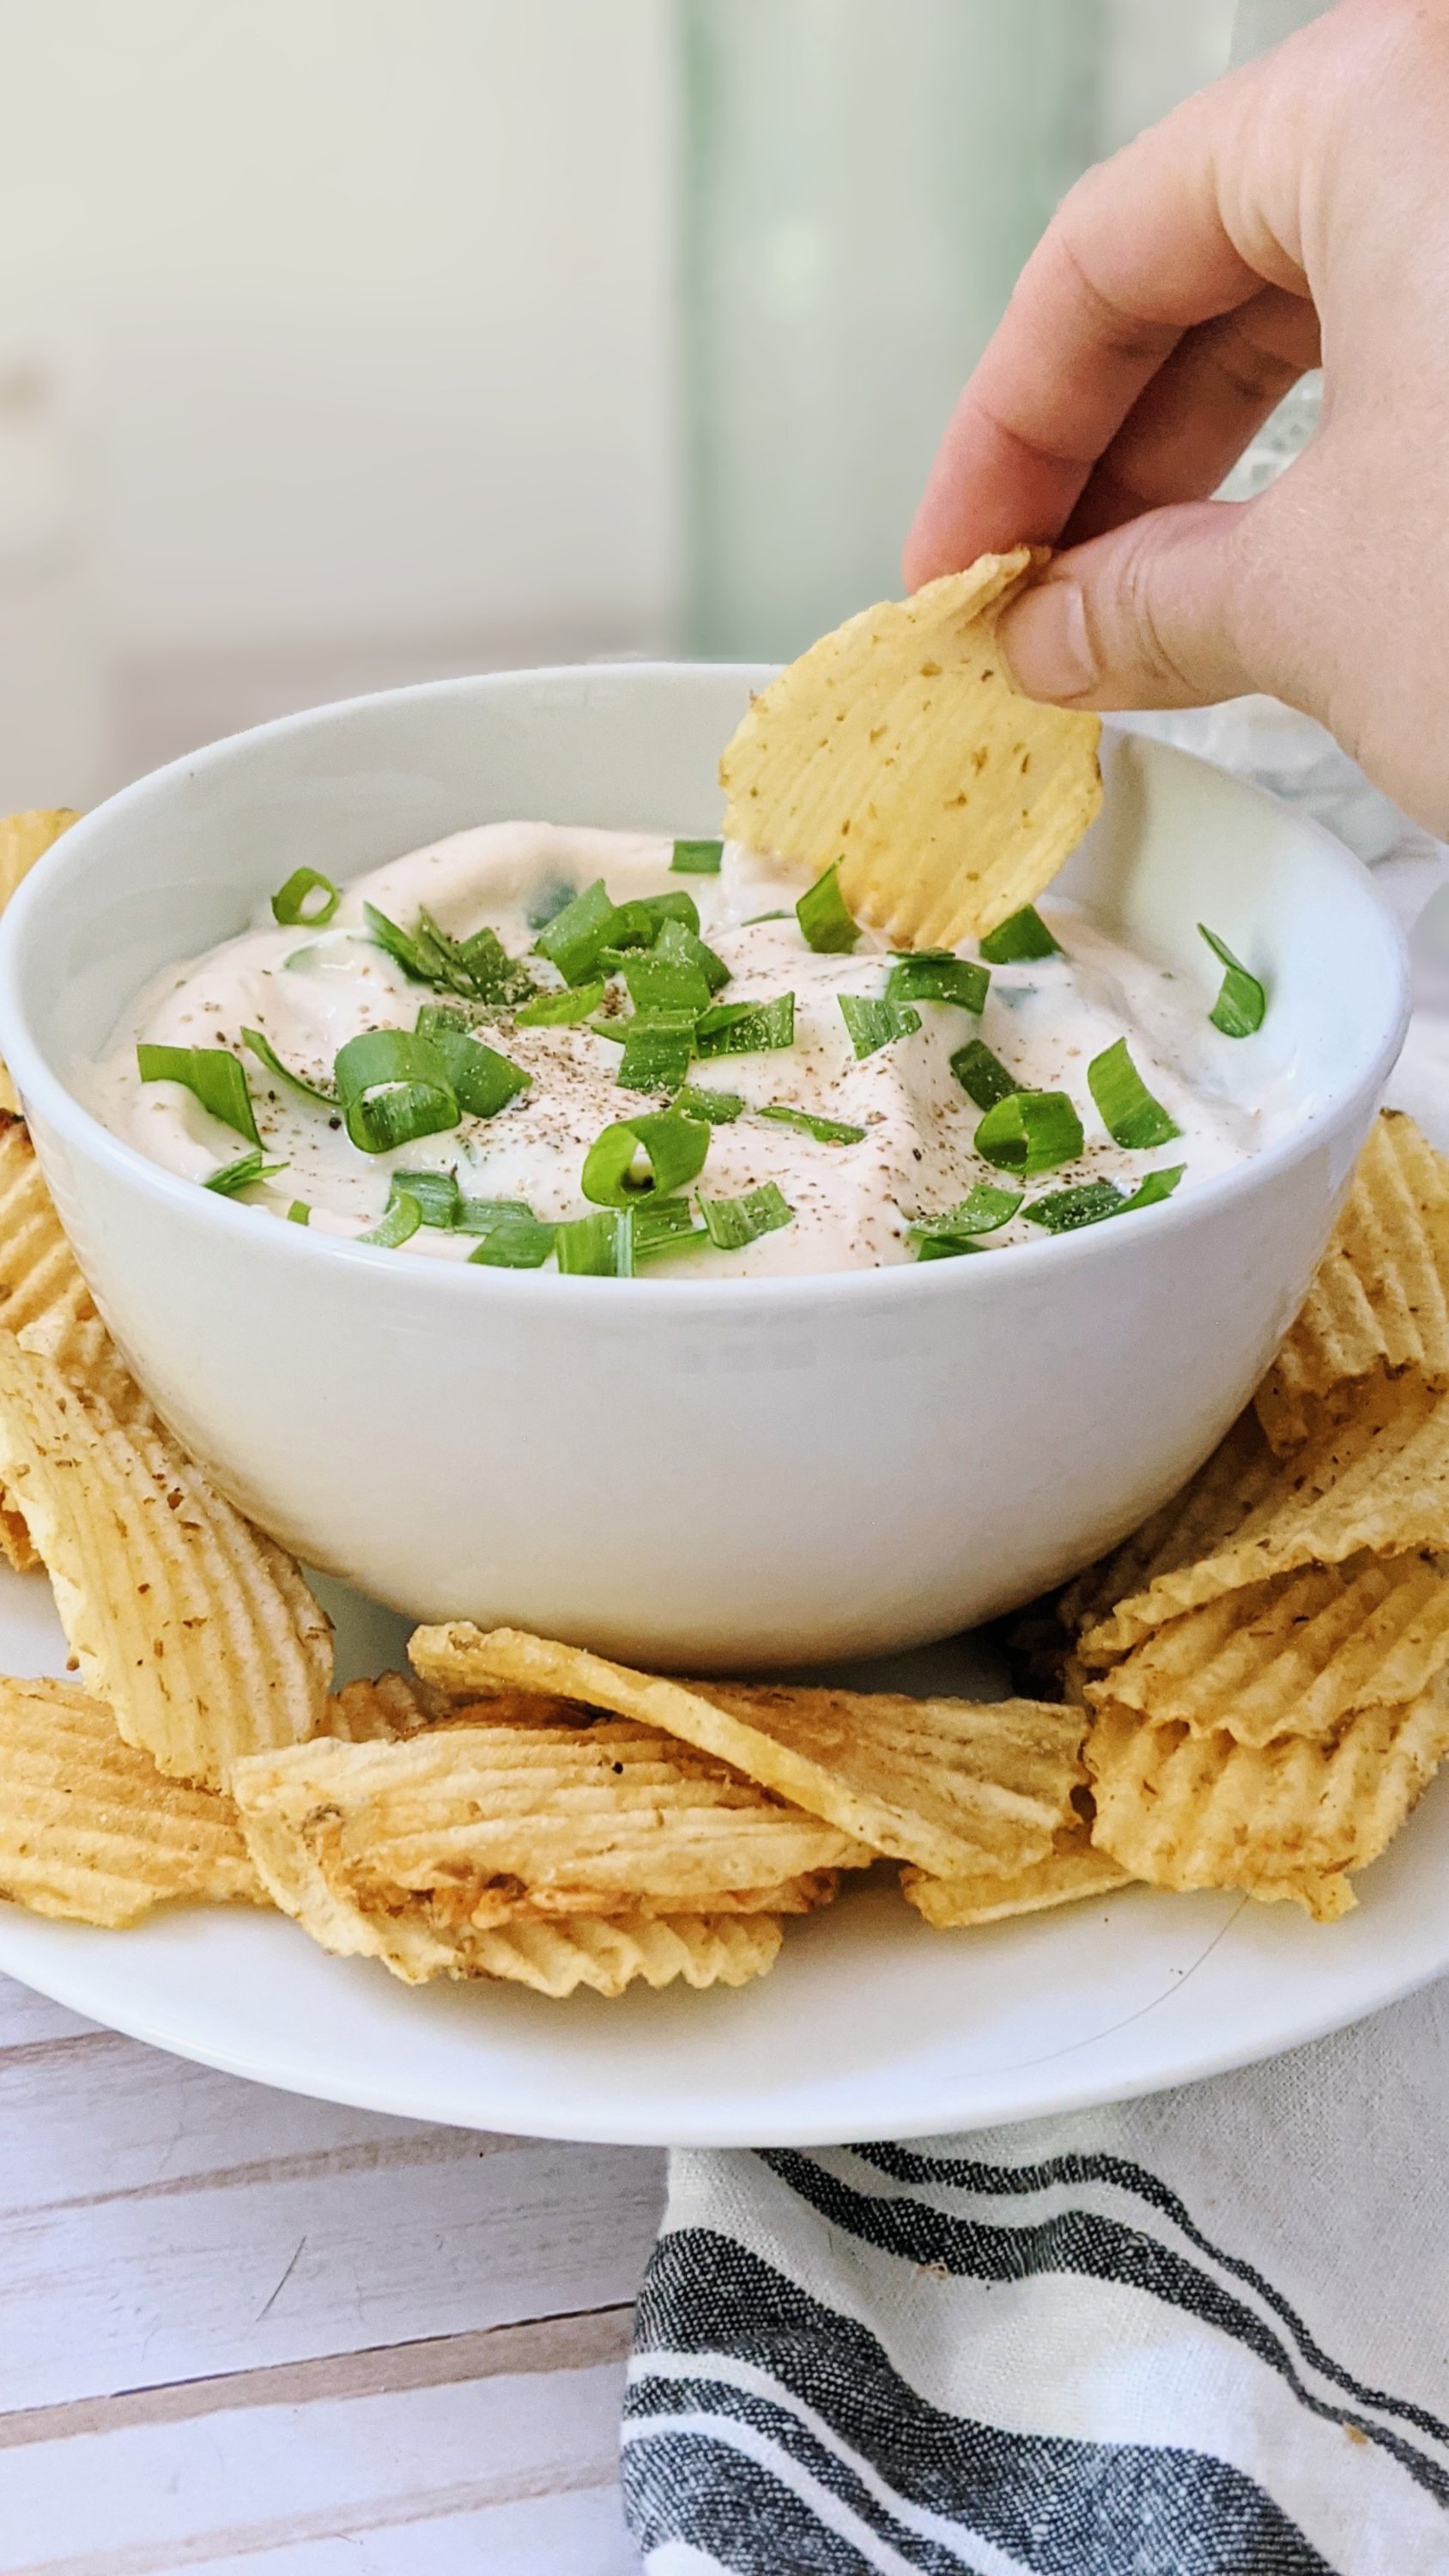 tofu chip dip recipe vegan gluten free sour cream and onion party dip last minute vegan party appetizers tofu blender dip recipe dips for potato chips without dairy